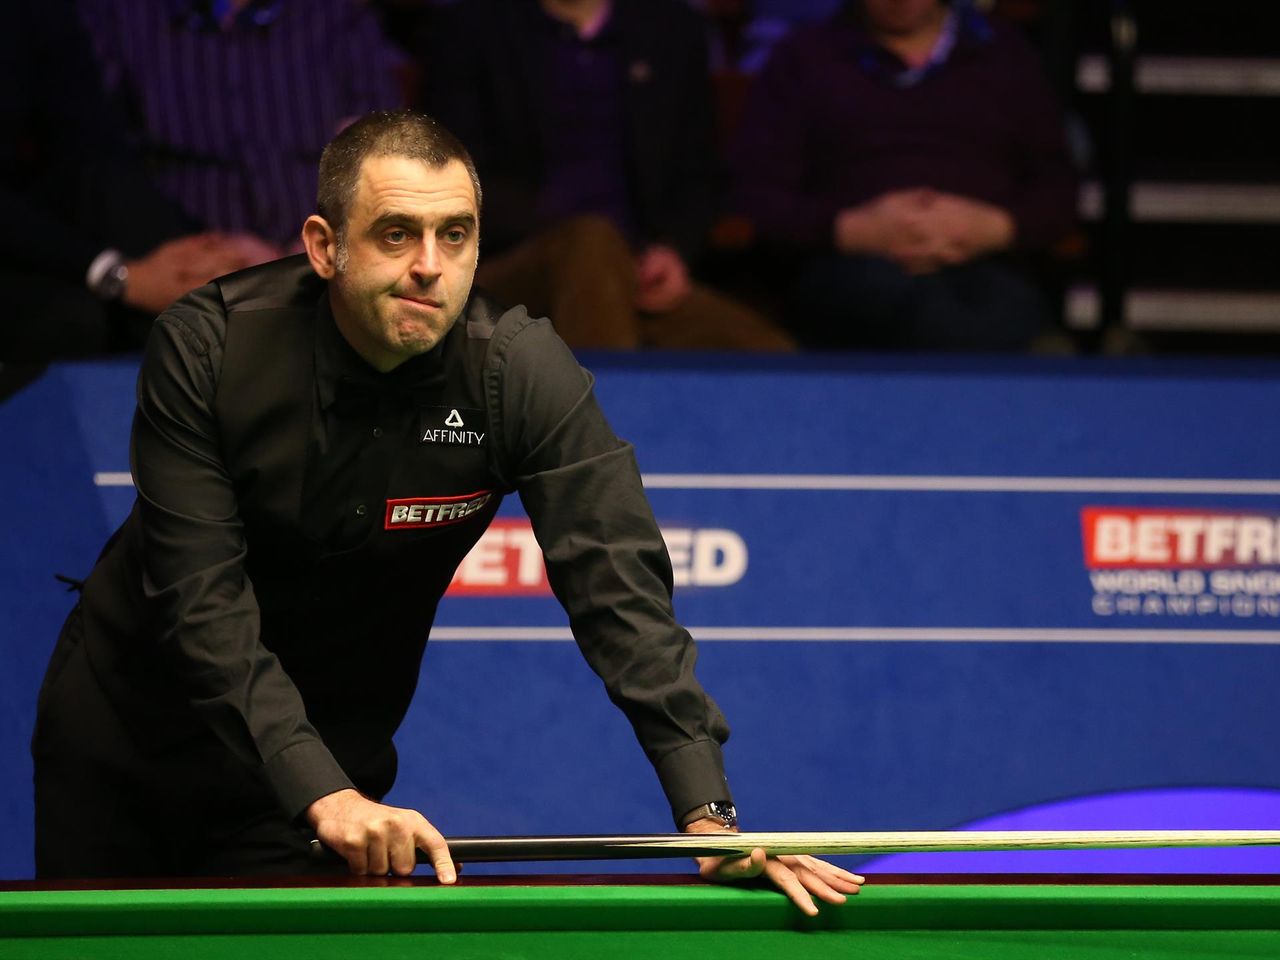 World Snooker Championship 2021 - Schedule, Results, order play at Crucible Eurosport